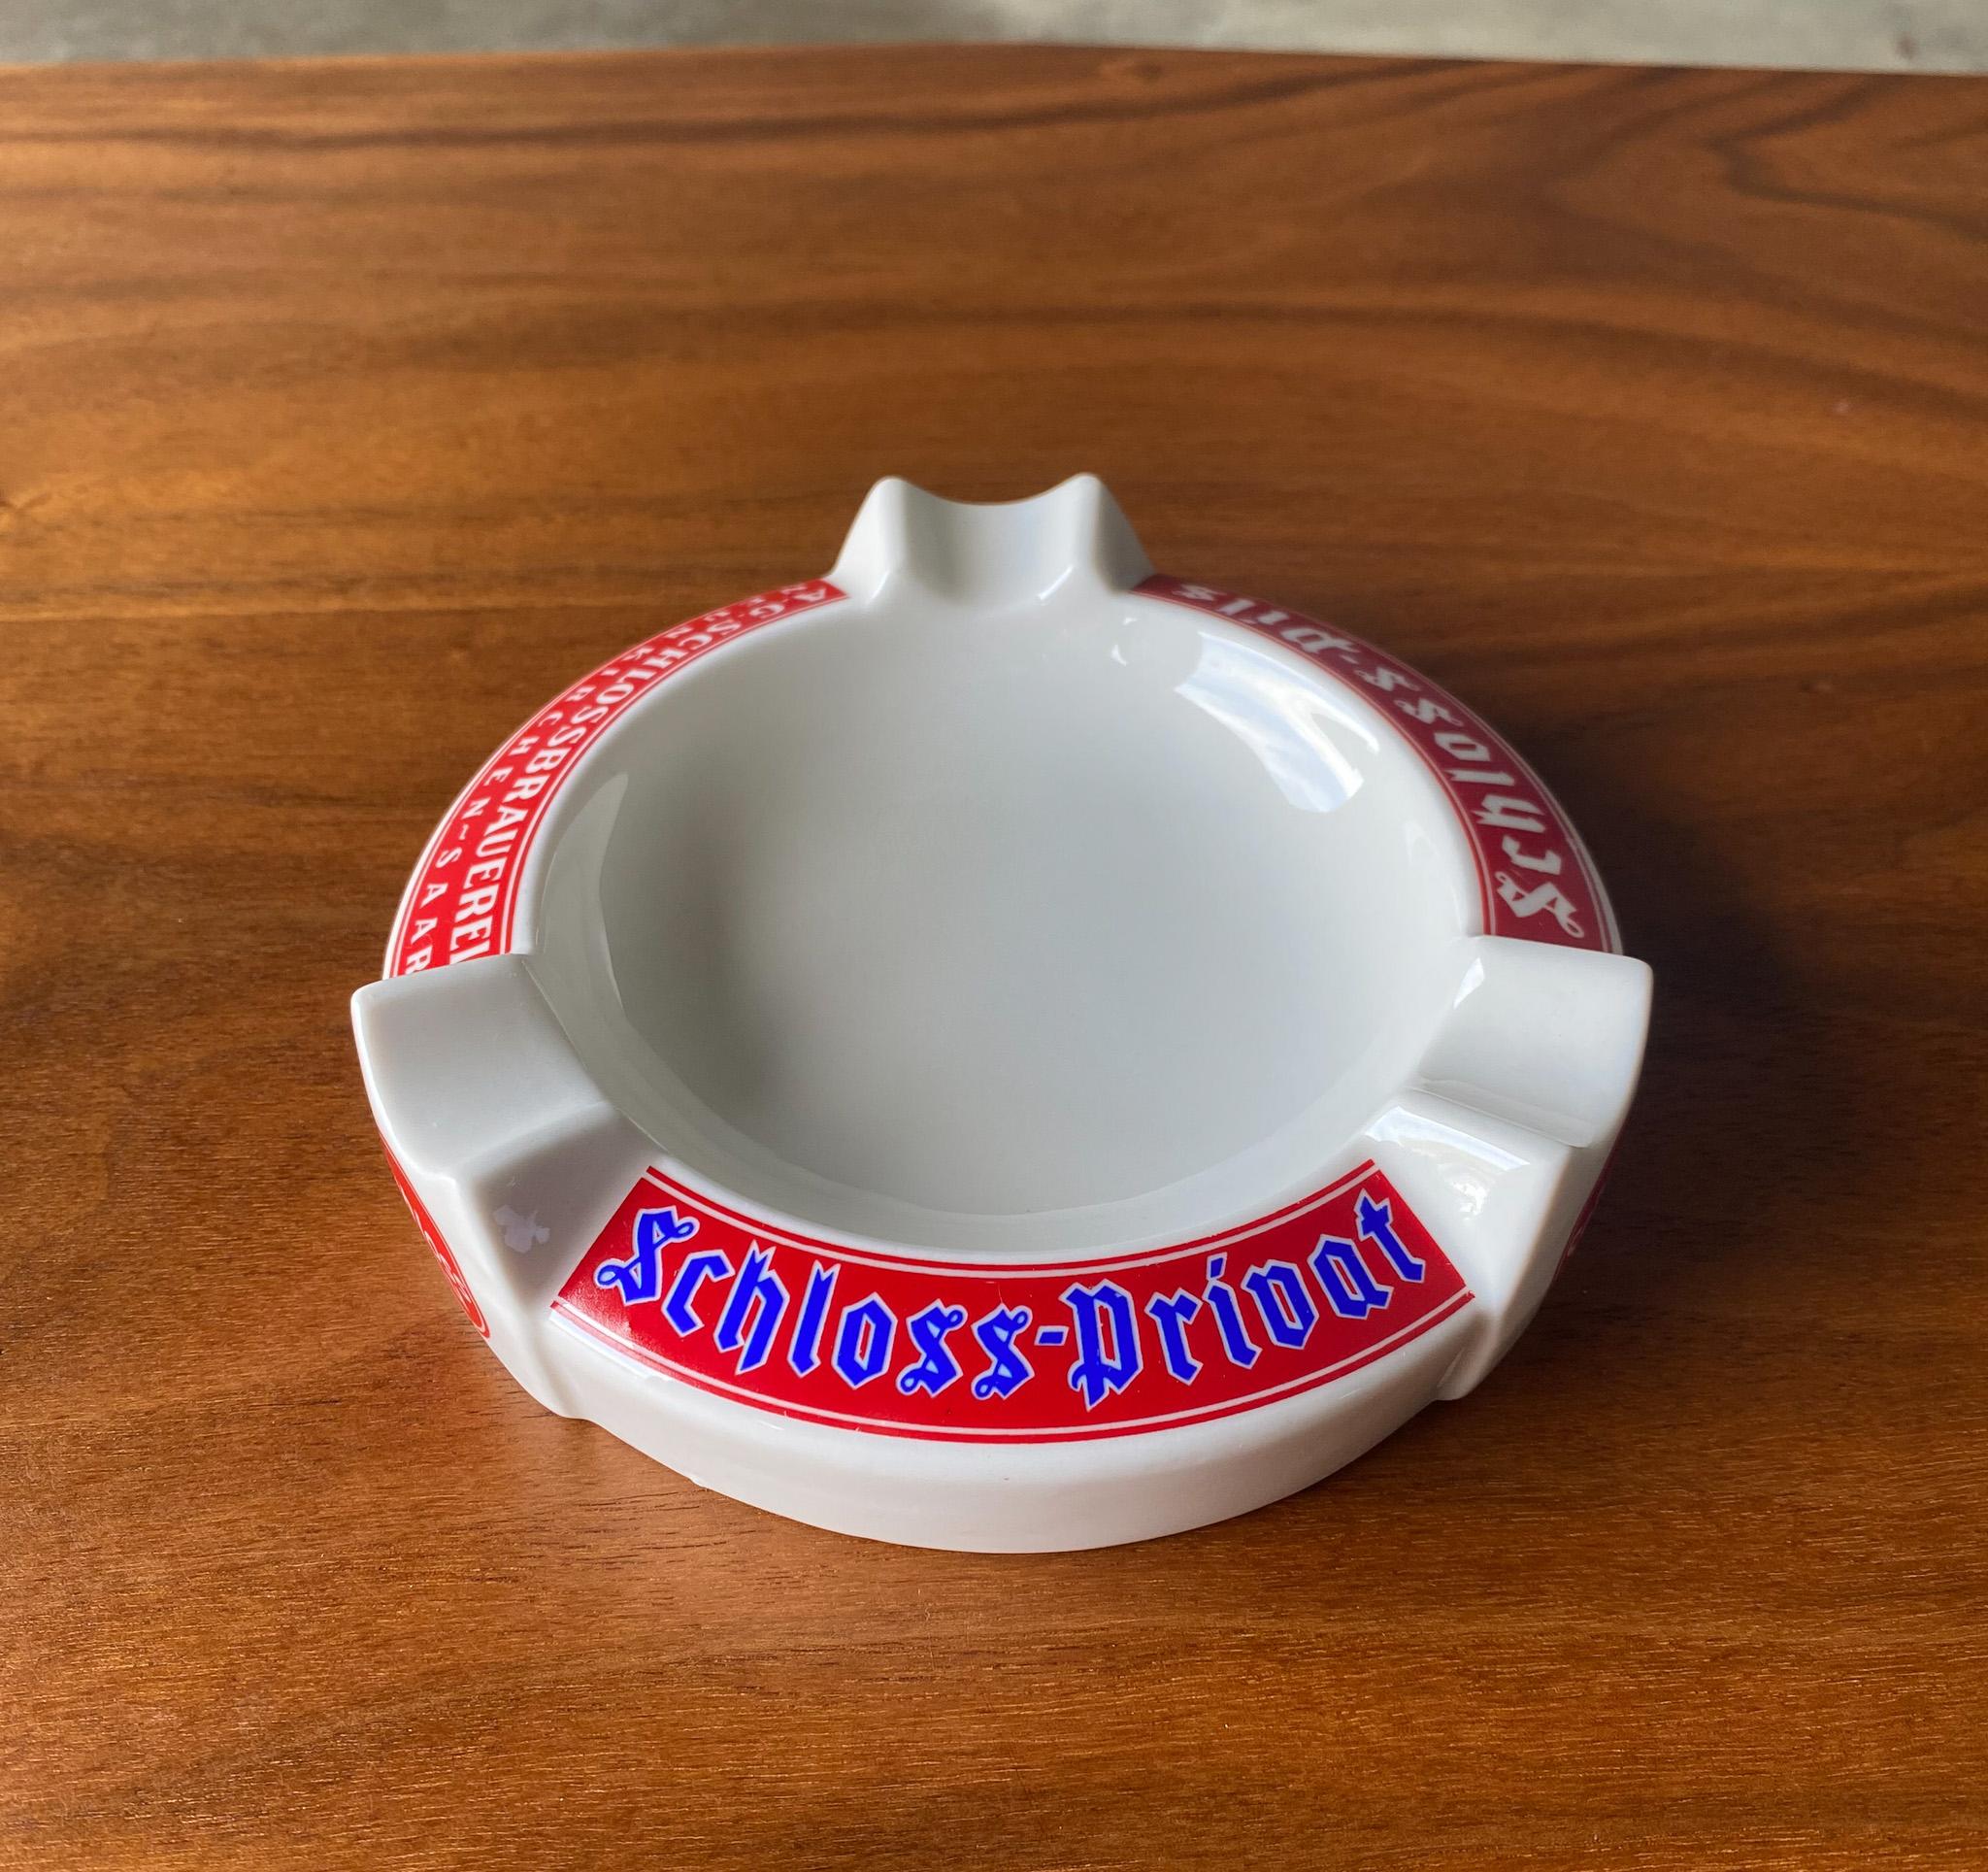 Vintage Schloss Brau Porcelain Ashtray by Fisher & Co. Germany For Sale 2